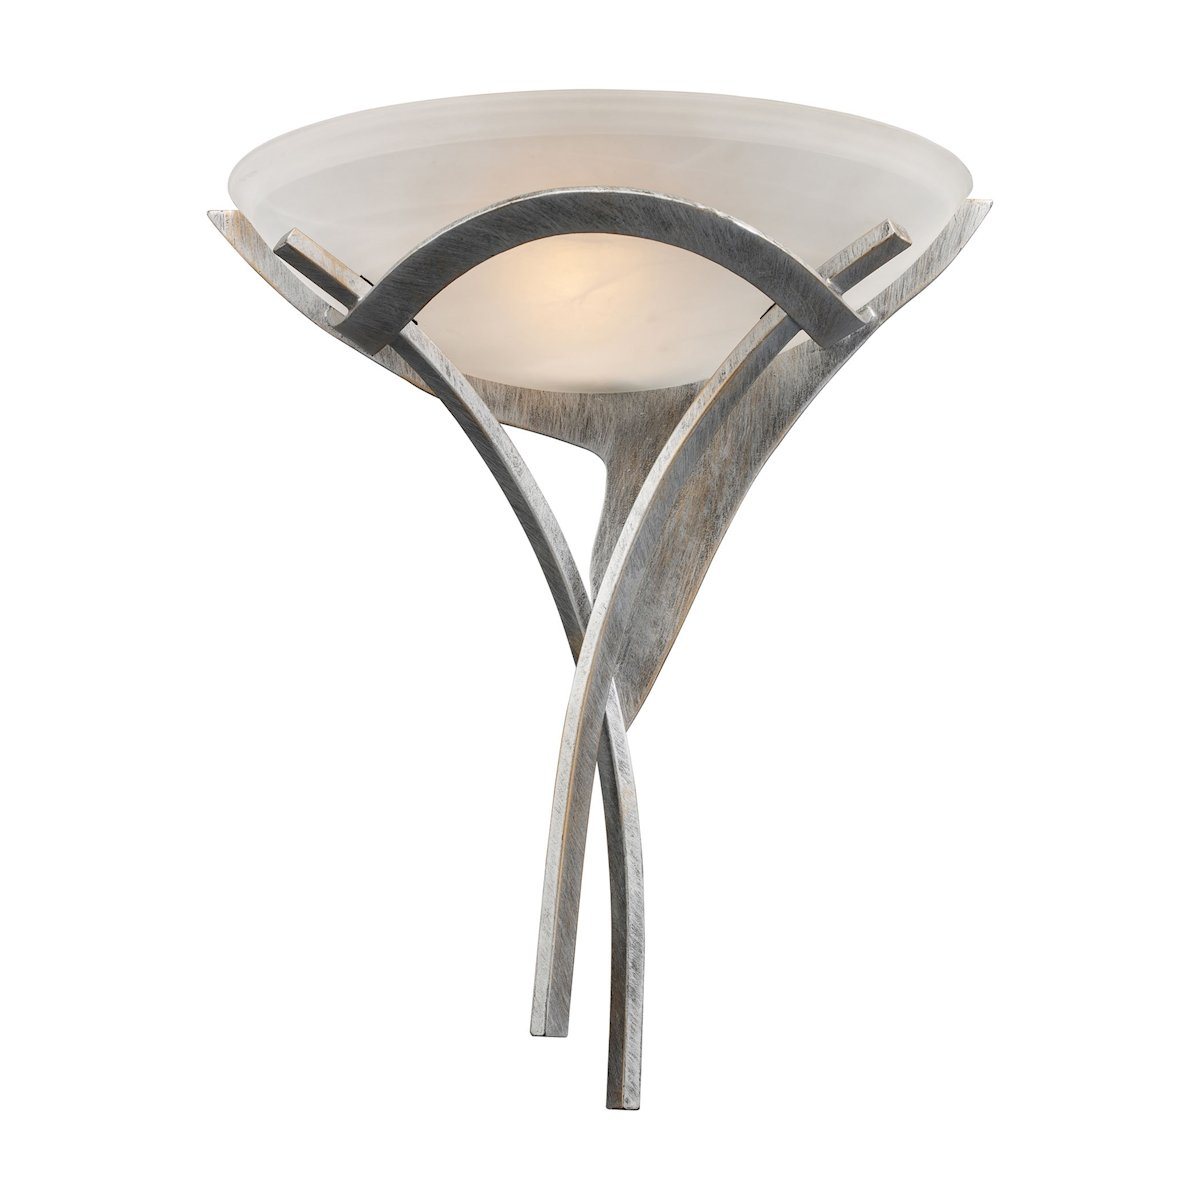 Aurora 1 Light Sconce In Tarnished Silver With White Faux-Alabaster Glass Wall Sconce Elk Lighting 